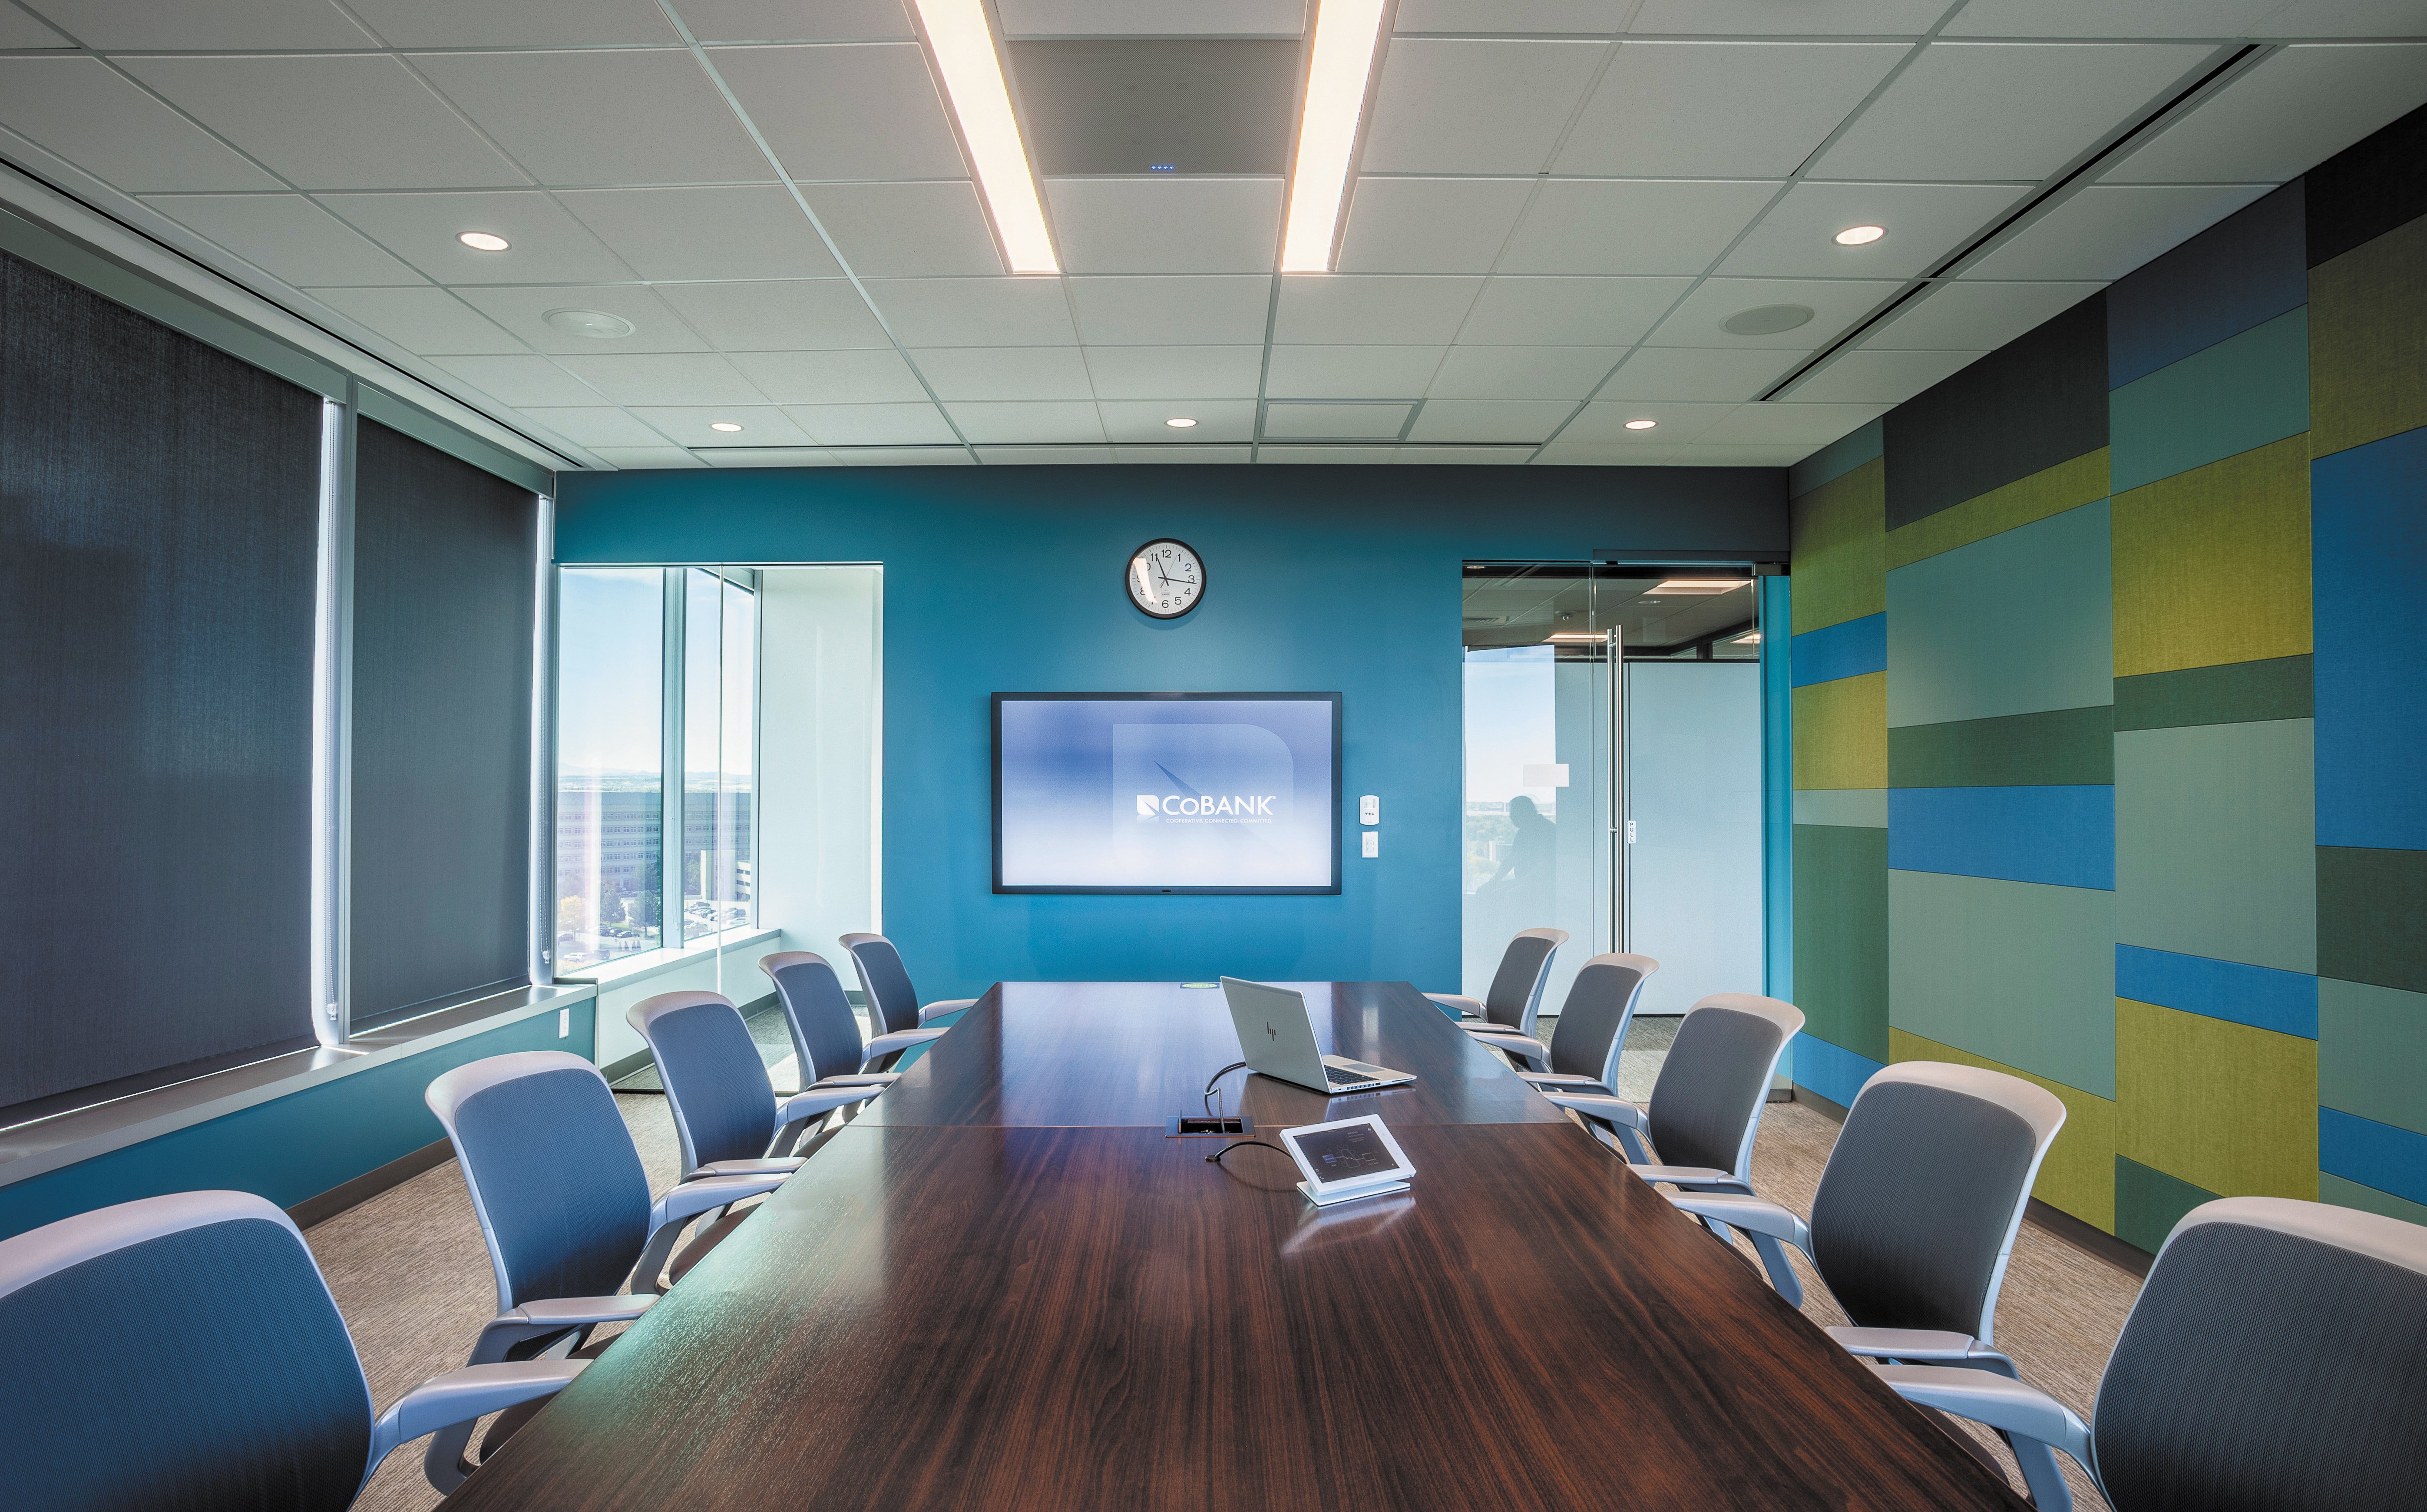 ListenUp has a broad array of expertise for your next office project.